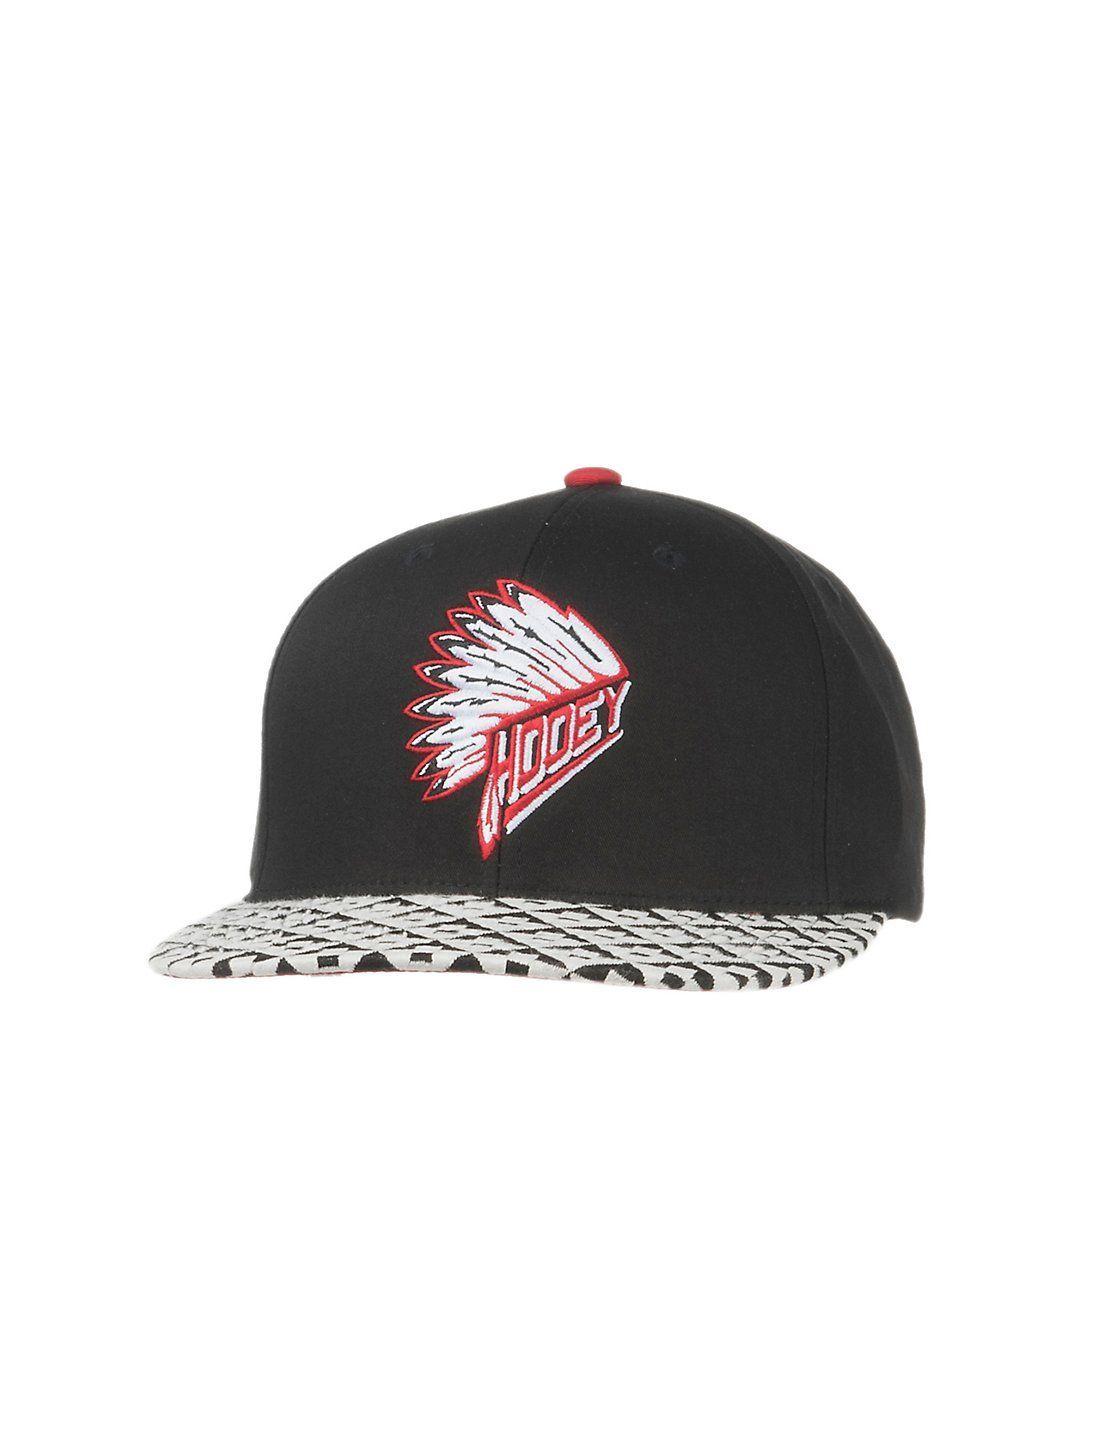 Red and Black Western Logo - HOOey Black with Aztec Print Brim and Red Chief Headdress Logo Snap ...